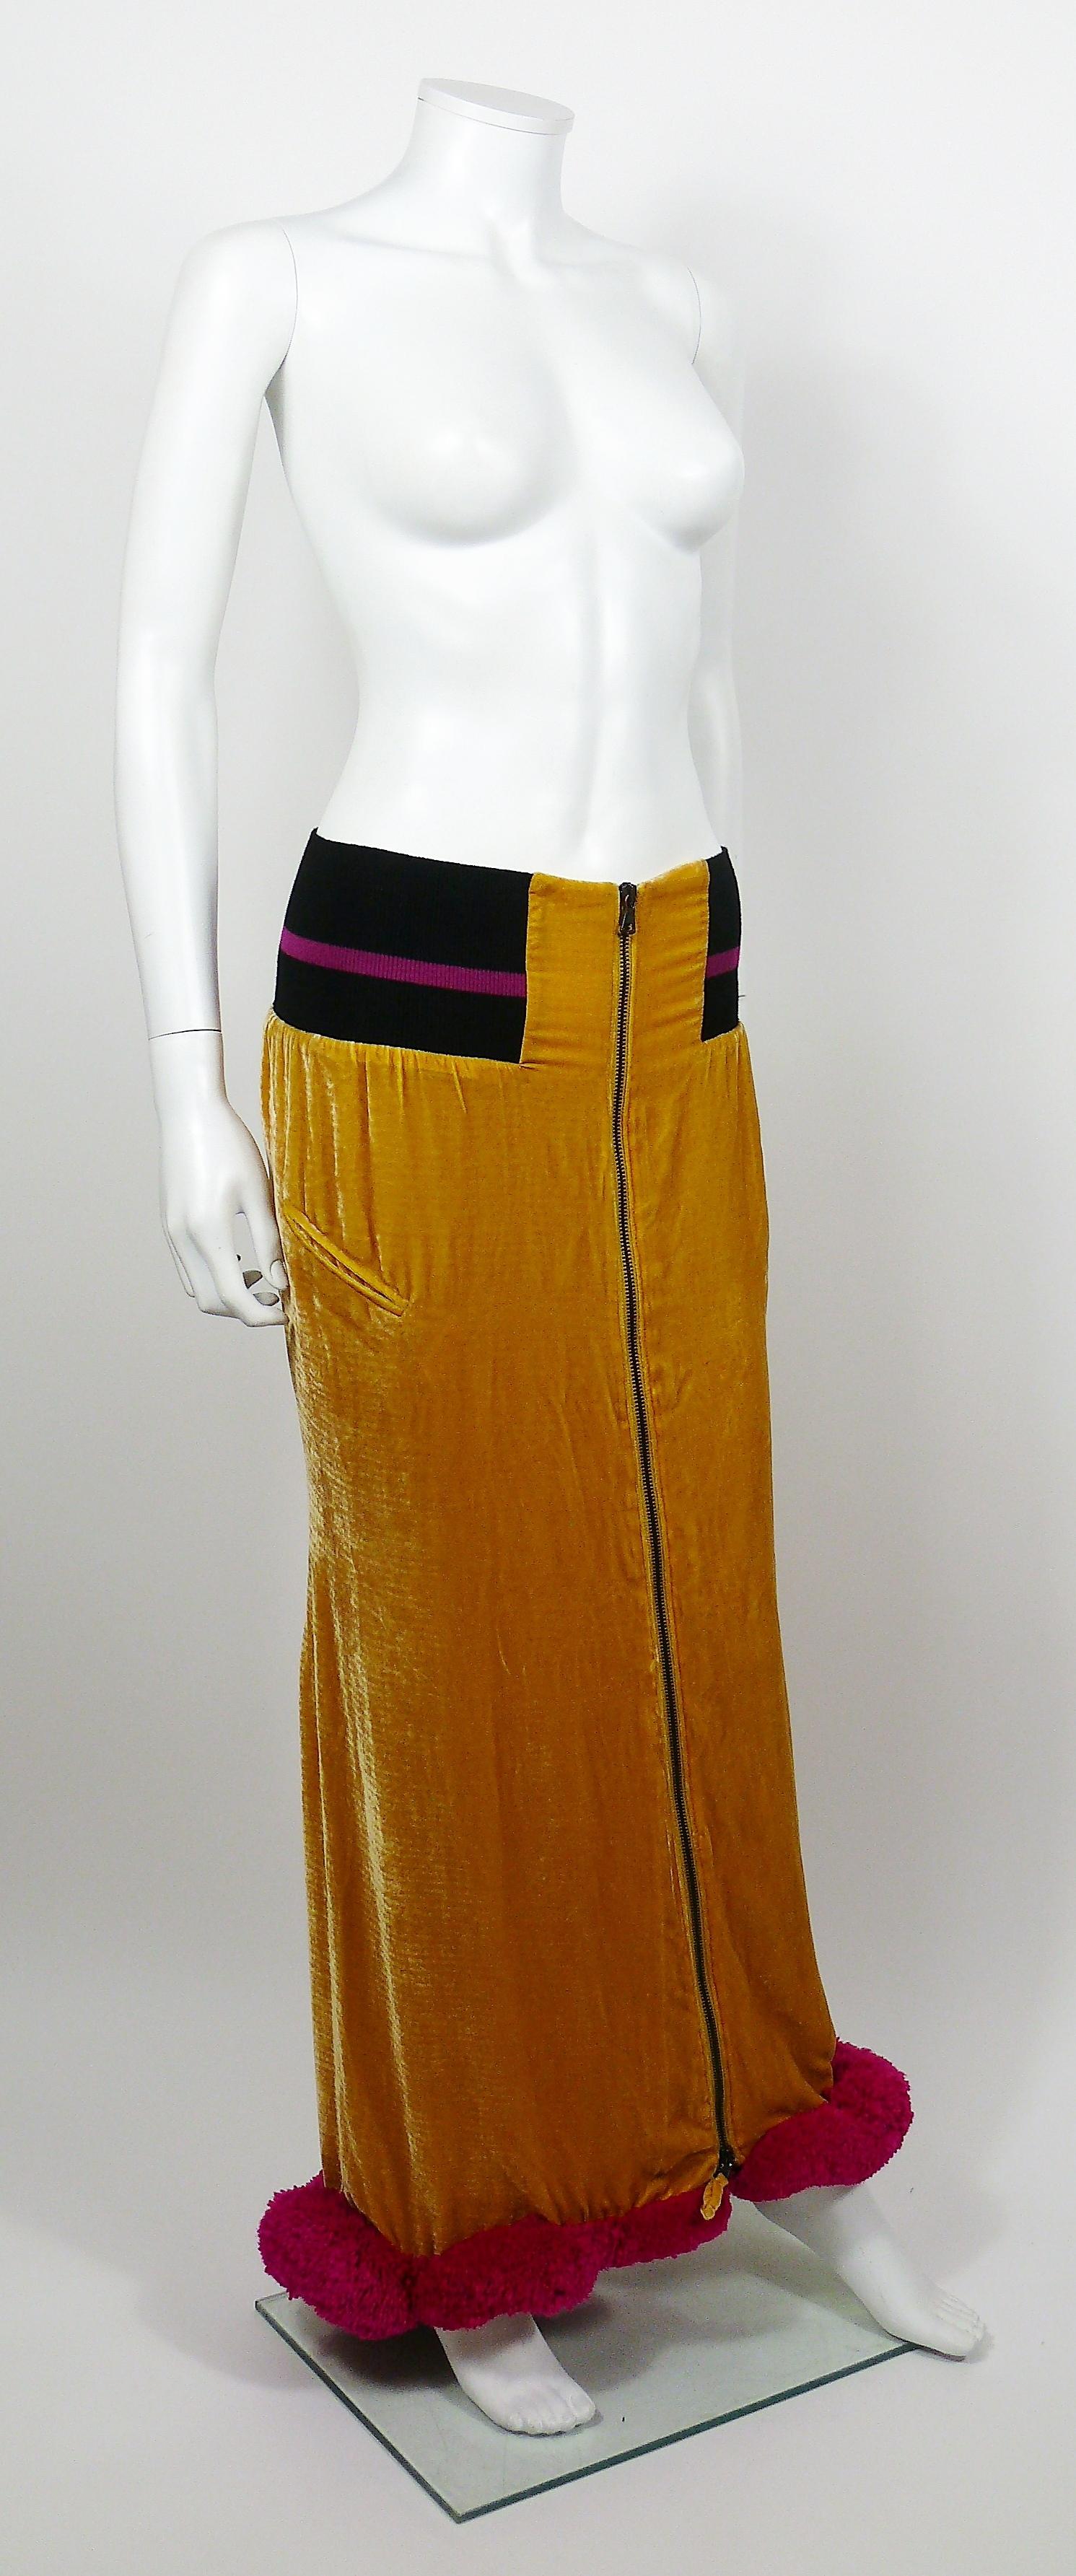 JEAN PAUL GAULTIER yellow maxi skirt featuring an extravagant cut out back, black striped knitted details, large fuchsia wool pudding trim, two faux pockets, zippered front and pink lining.

Label reads JEAN PAUL GAULTIER Femme.
Made in Italy.

Size